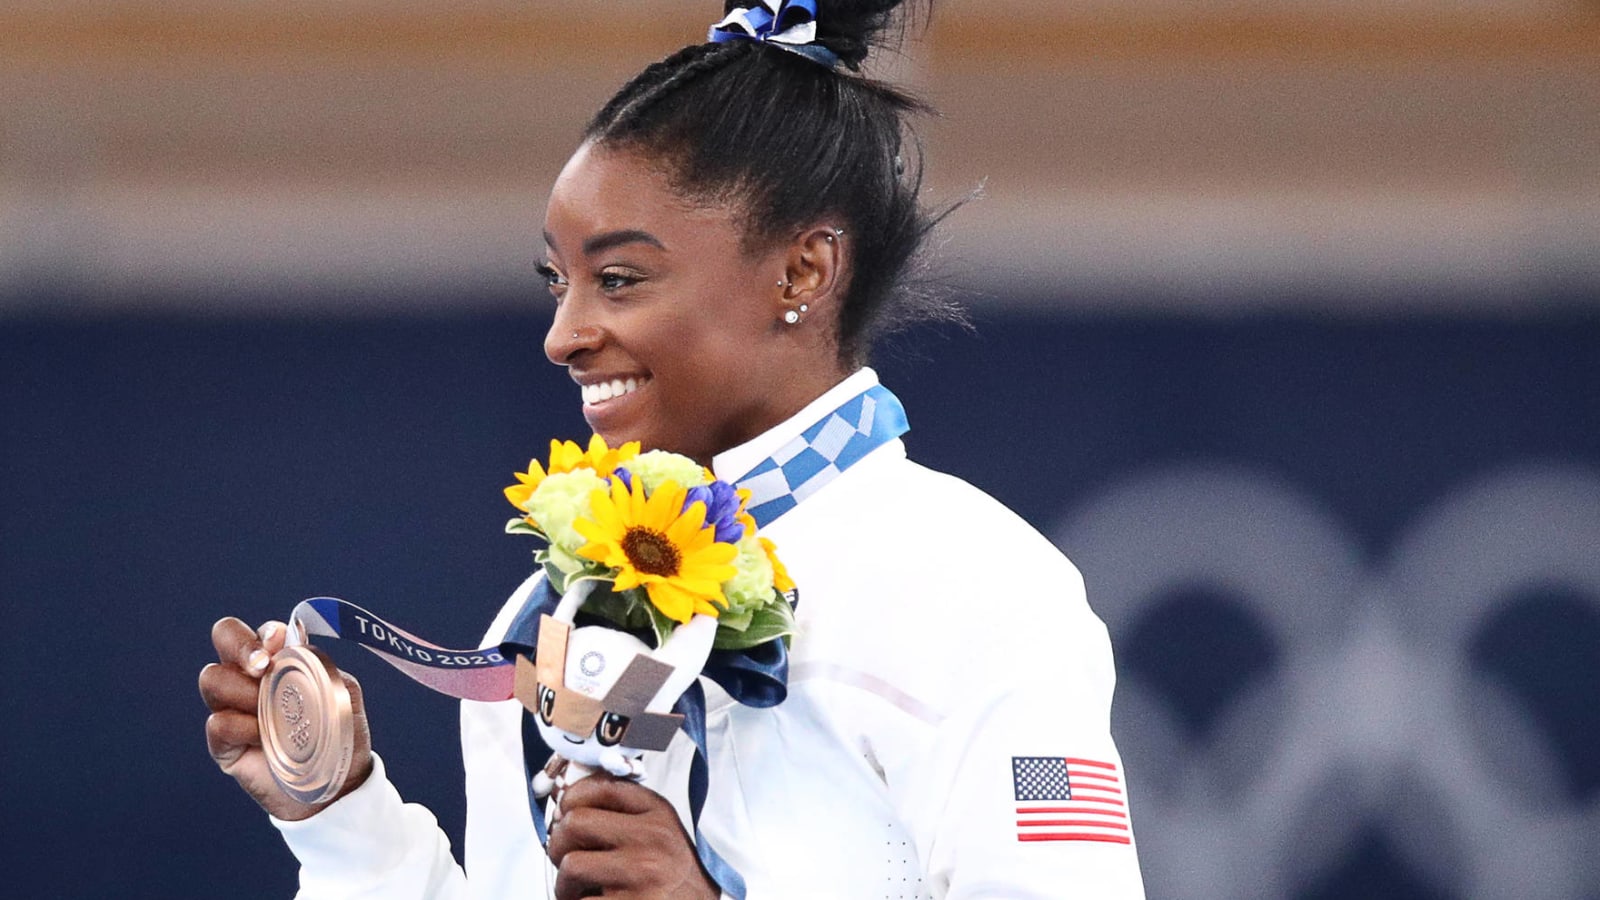 Biles explains why bronze medal meant more than all her golds